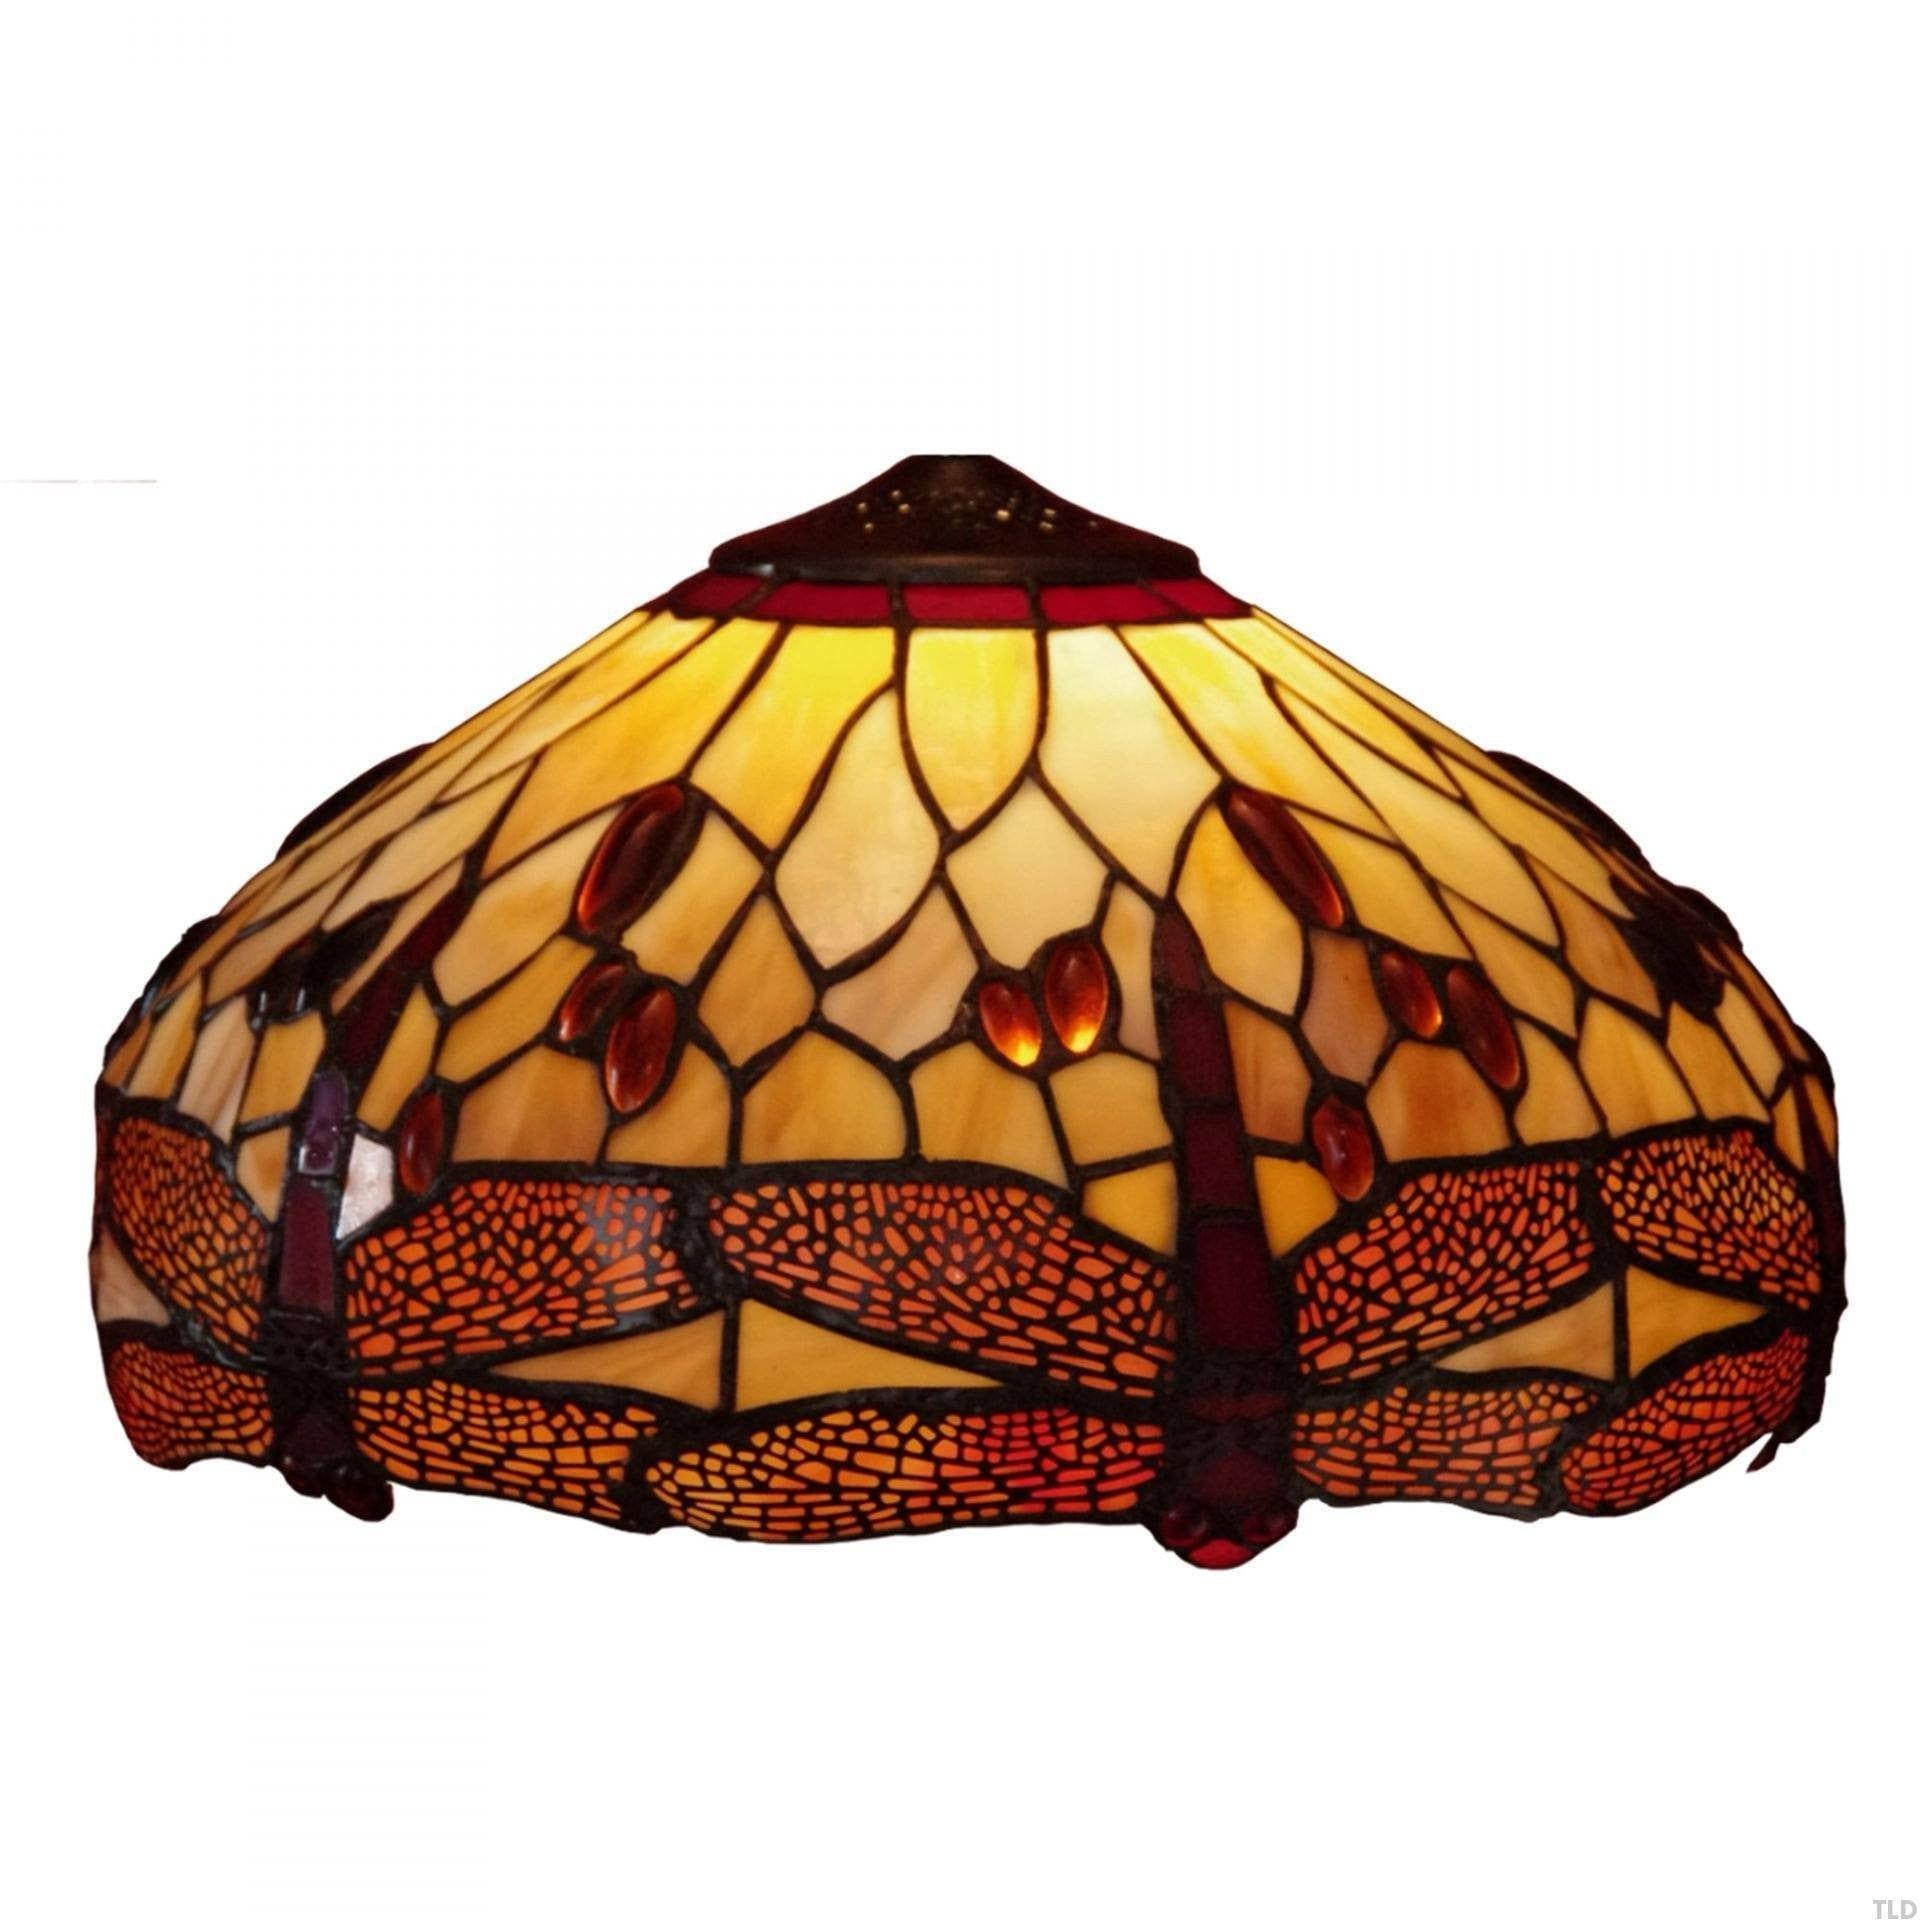 tiffany table lamp shades only